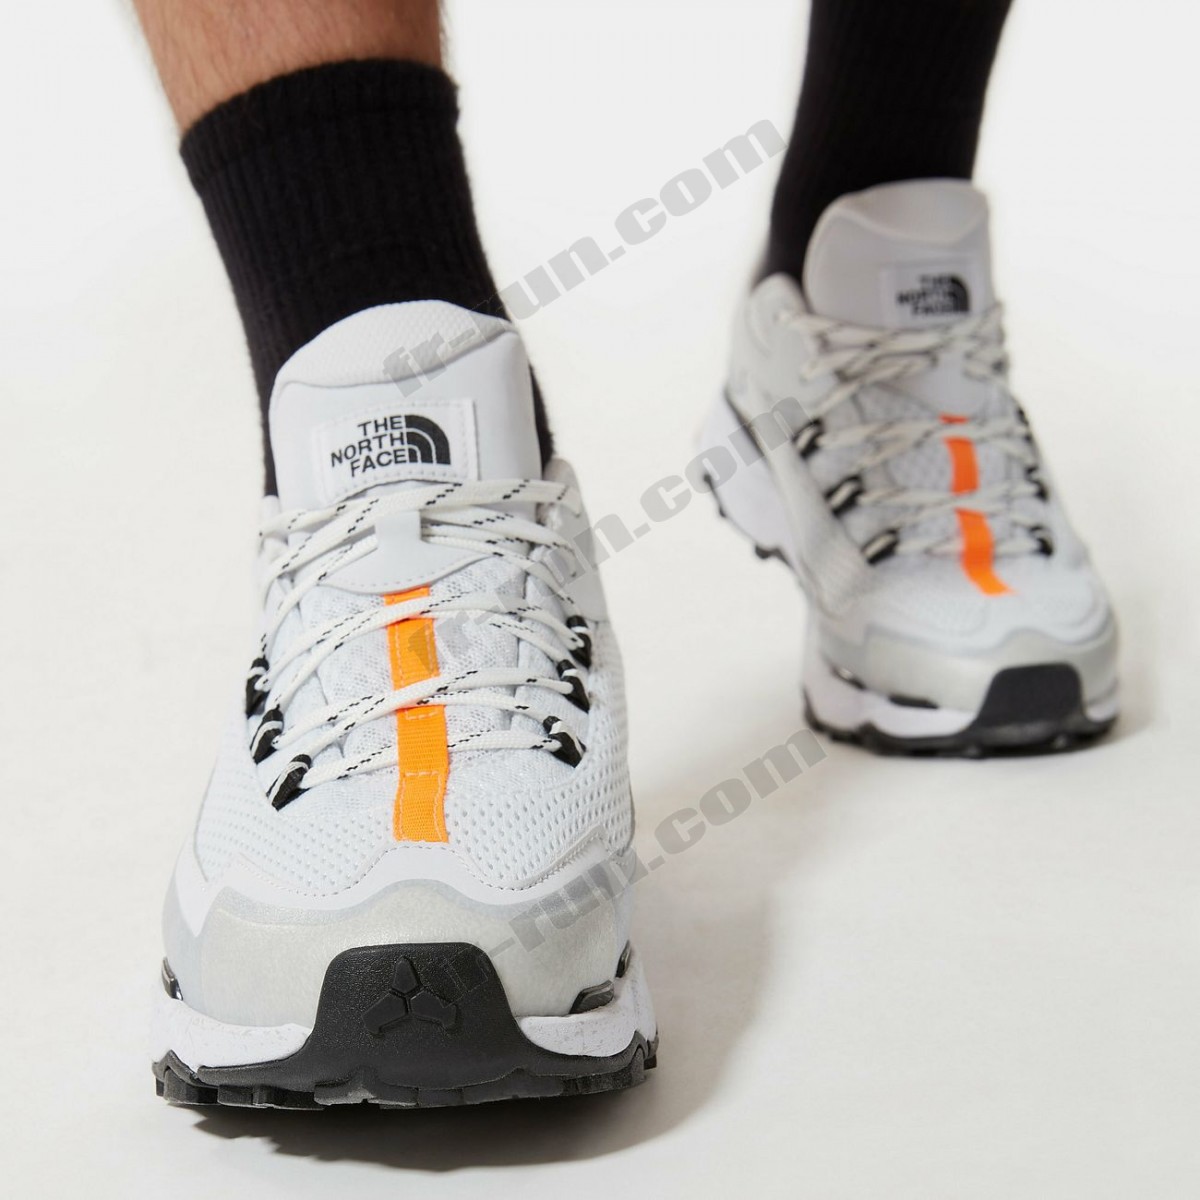 The North Face/Mode- Lifestyle homme THE NORTH FACE Chaussures The North Face Vectiv Taraval ◇◇◇ Pas Cher Du Tout - -34